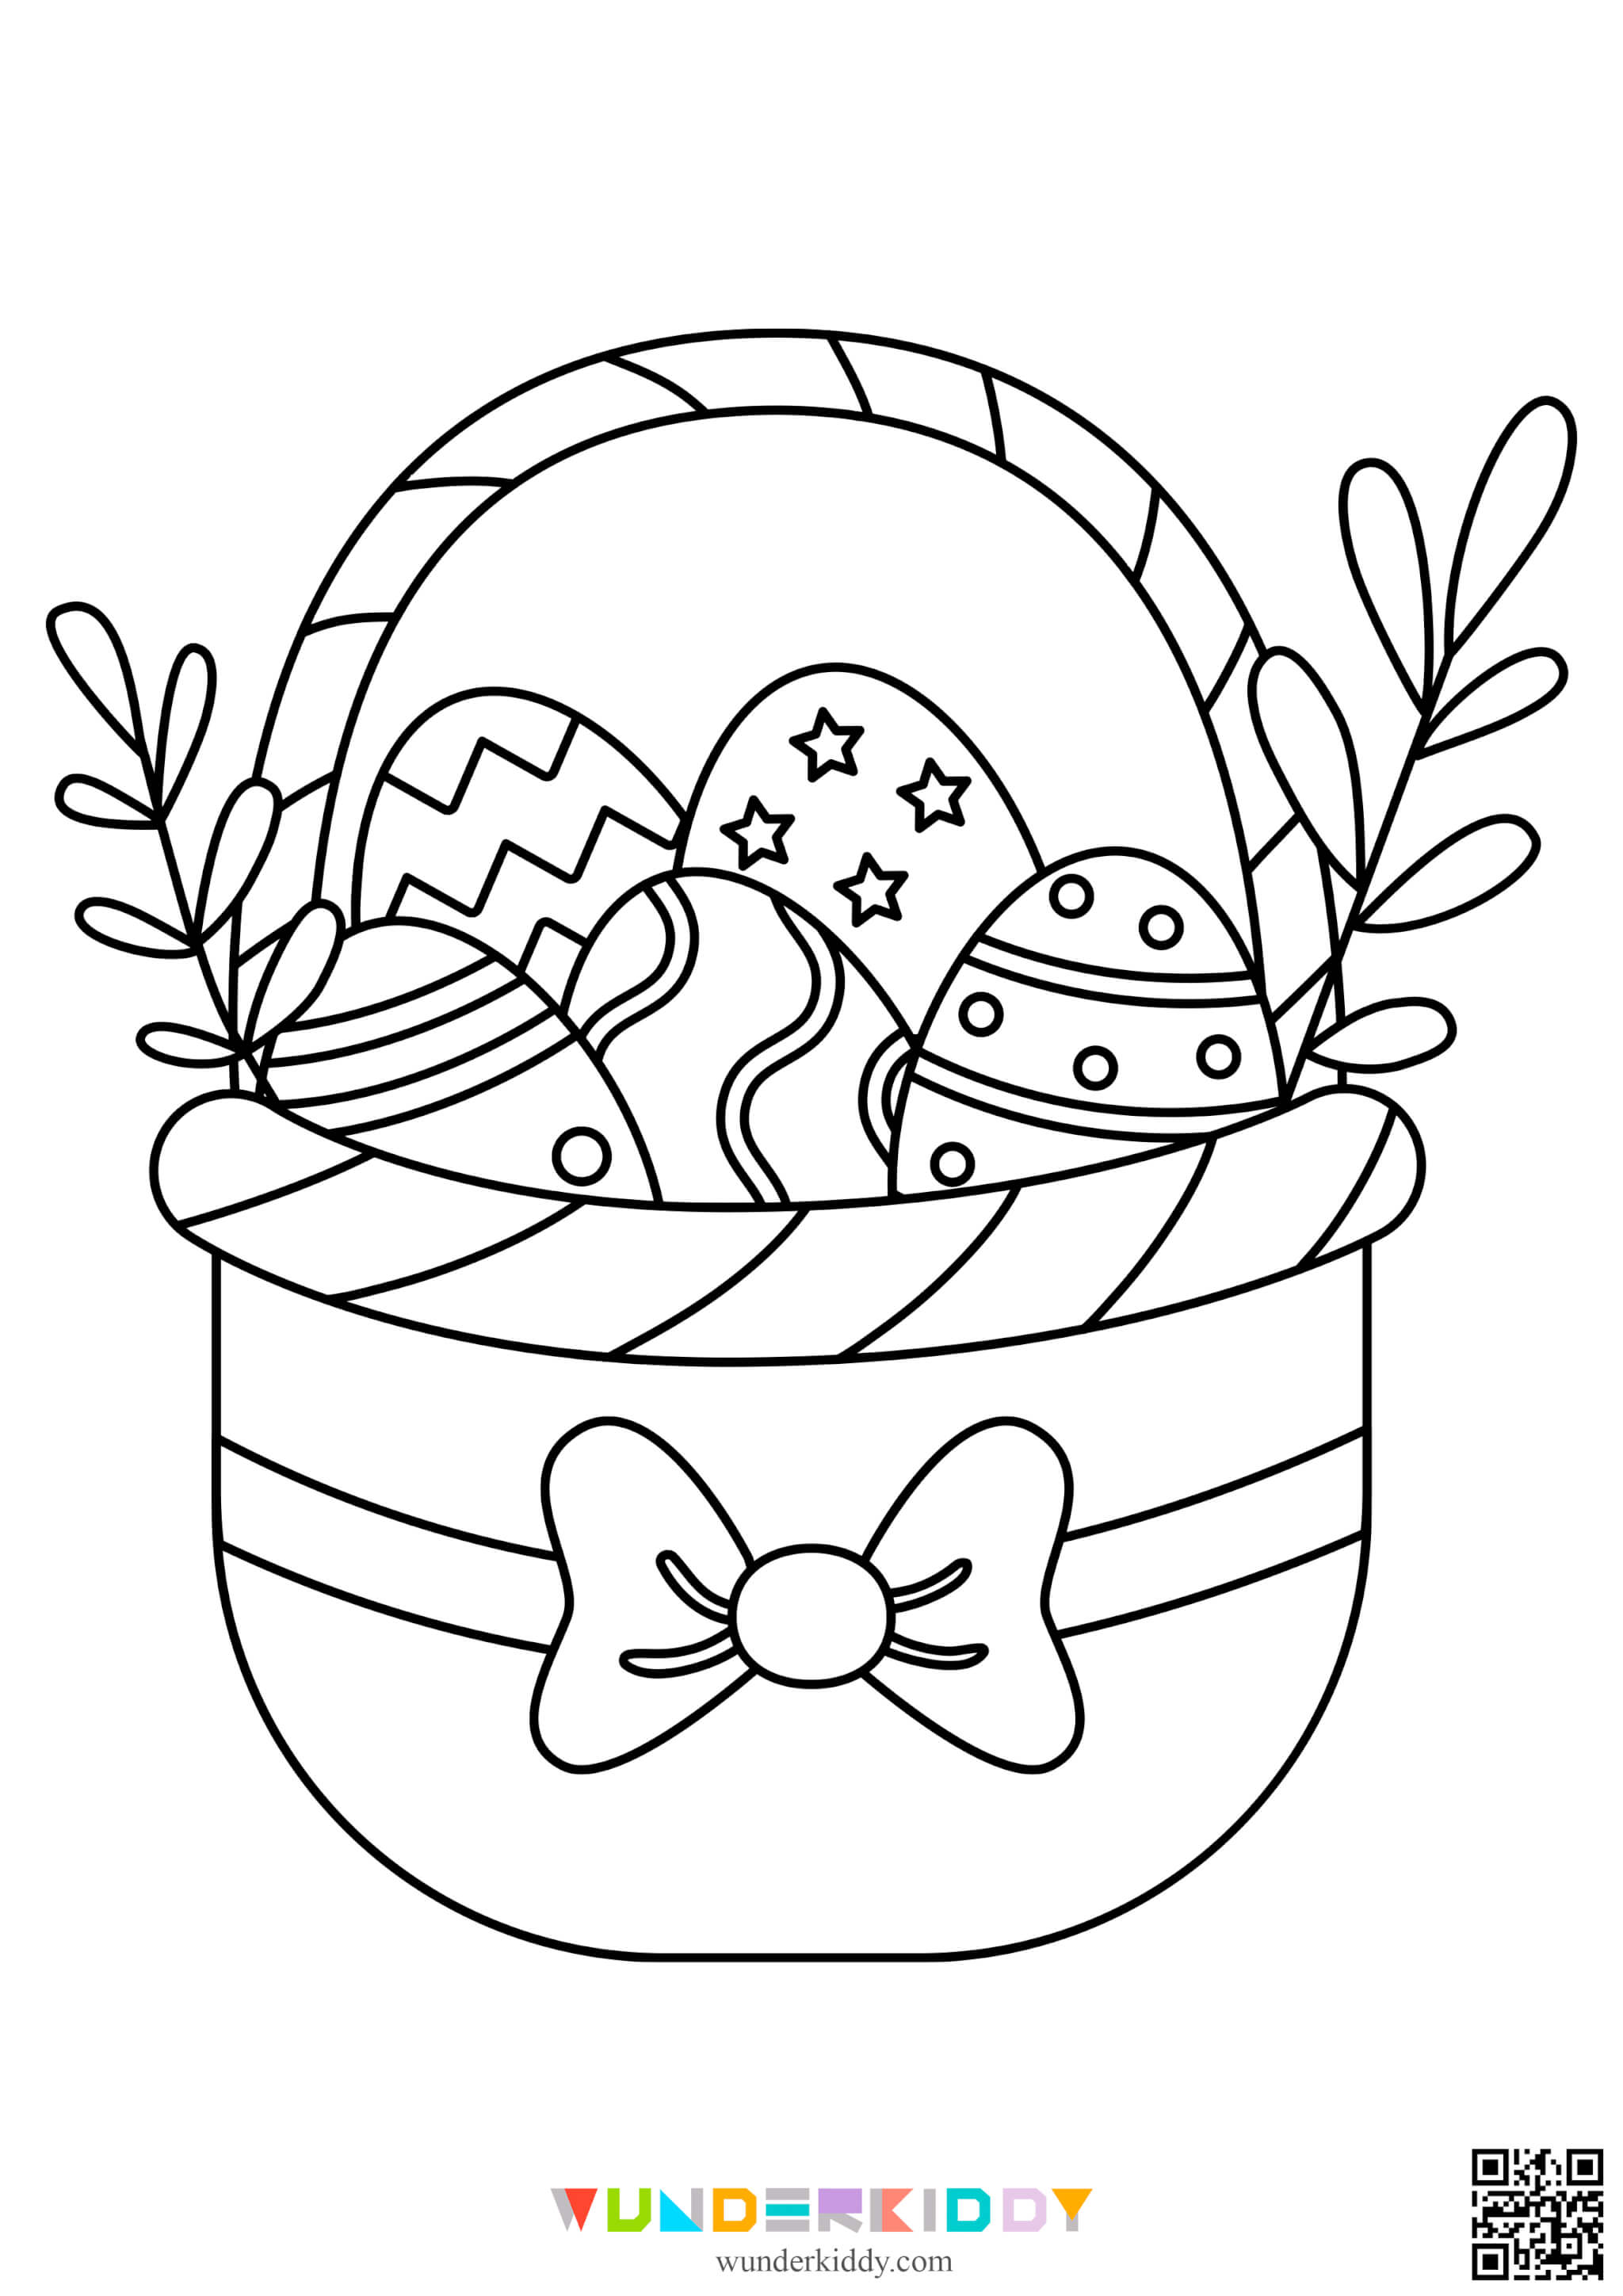 Easter Eggs Coloring Pages - Image 14